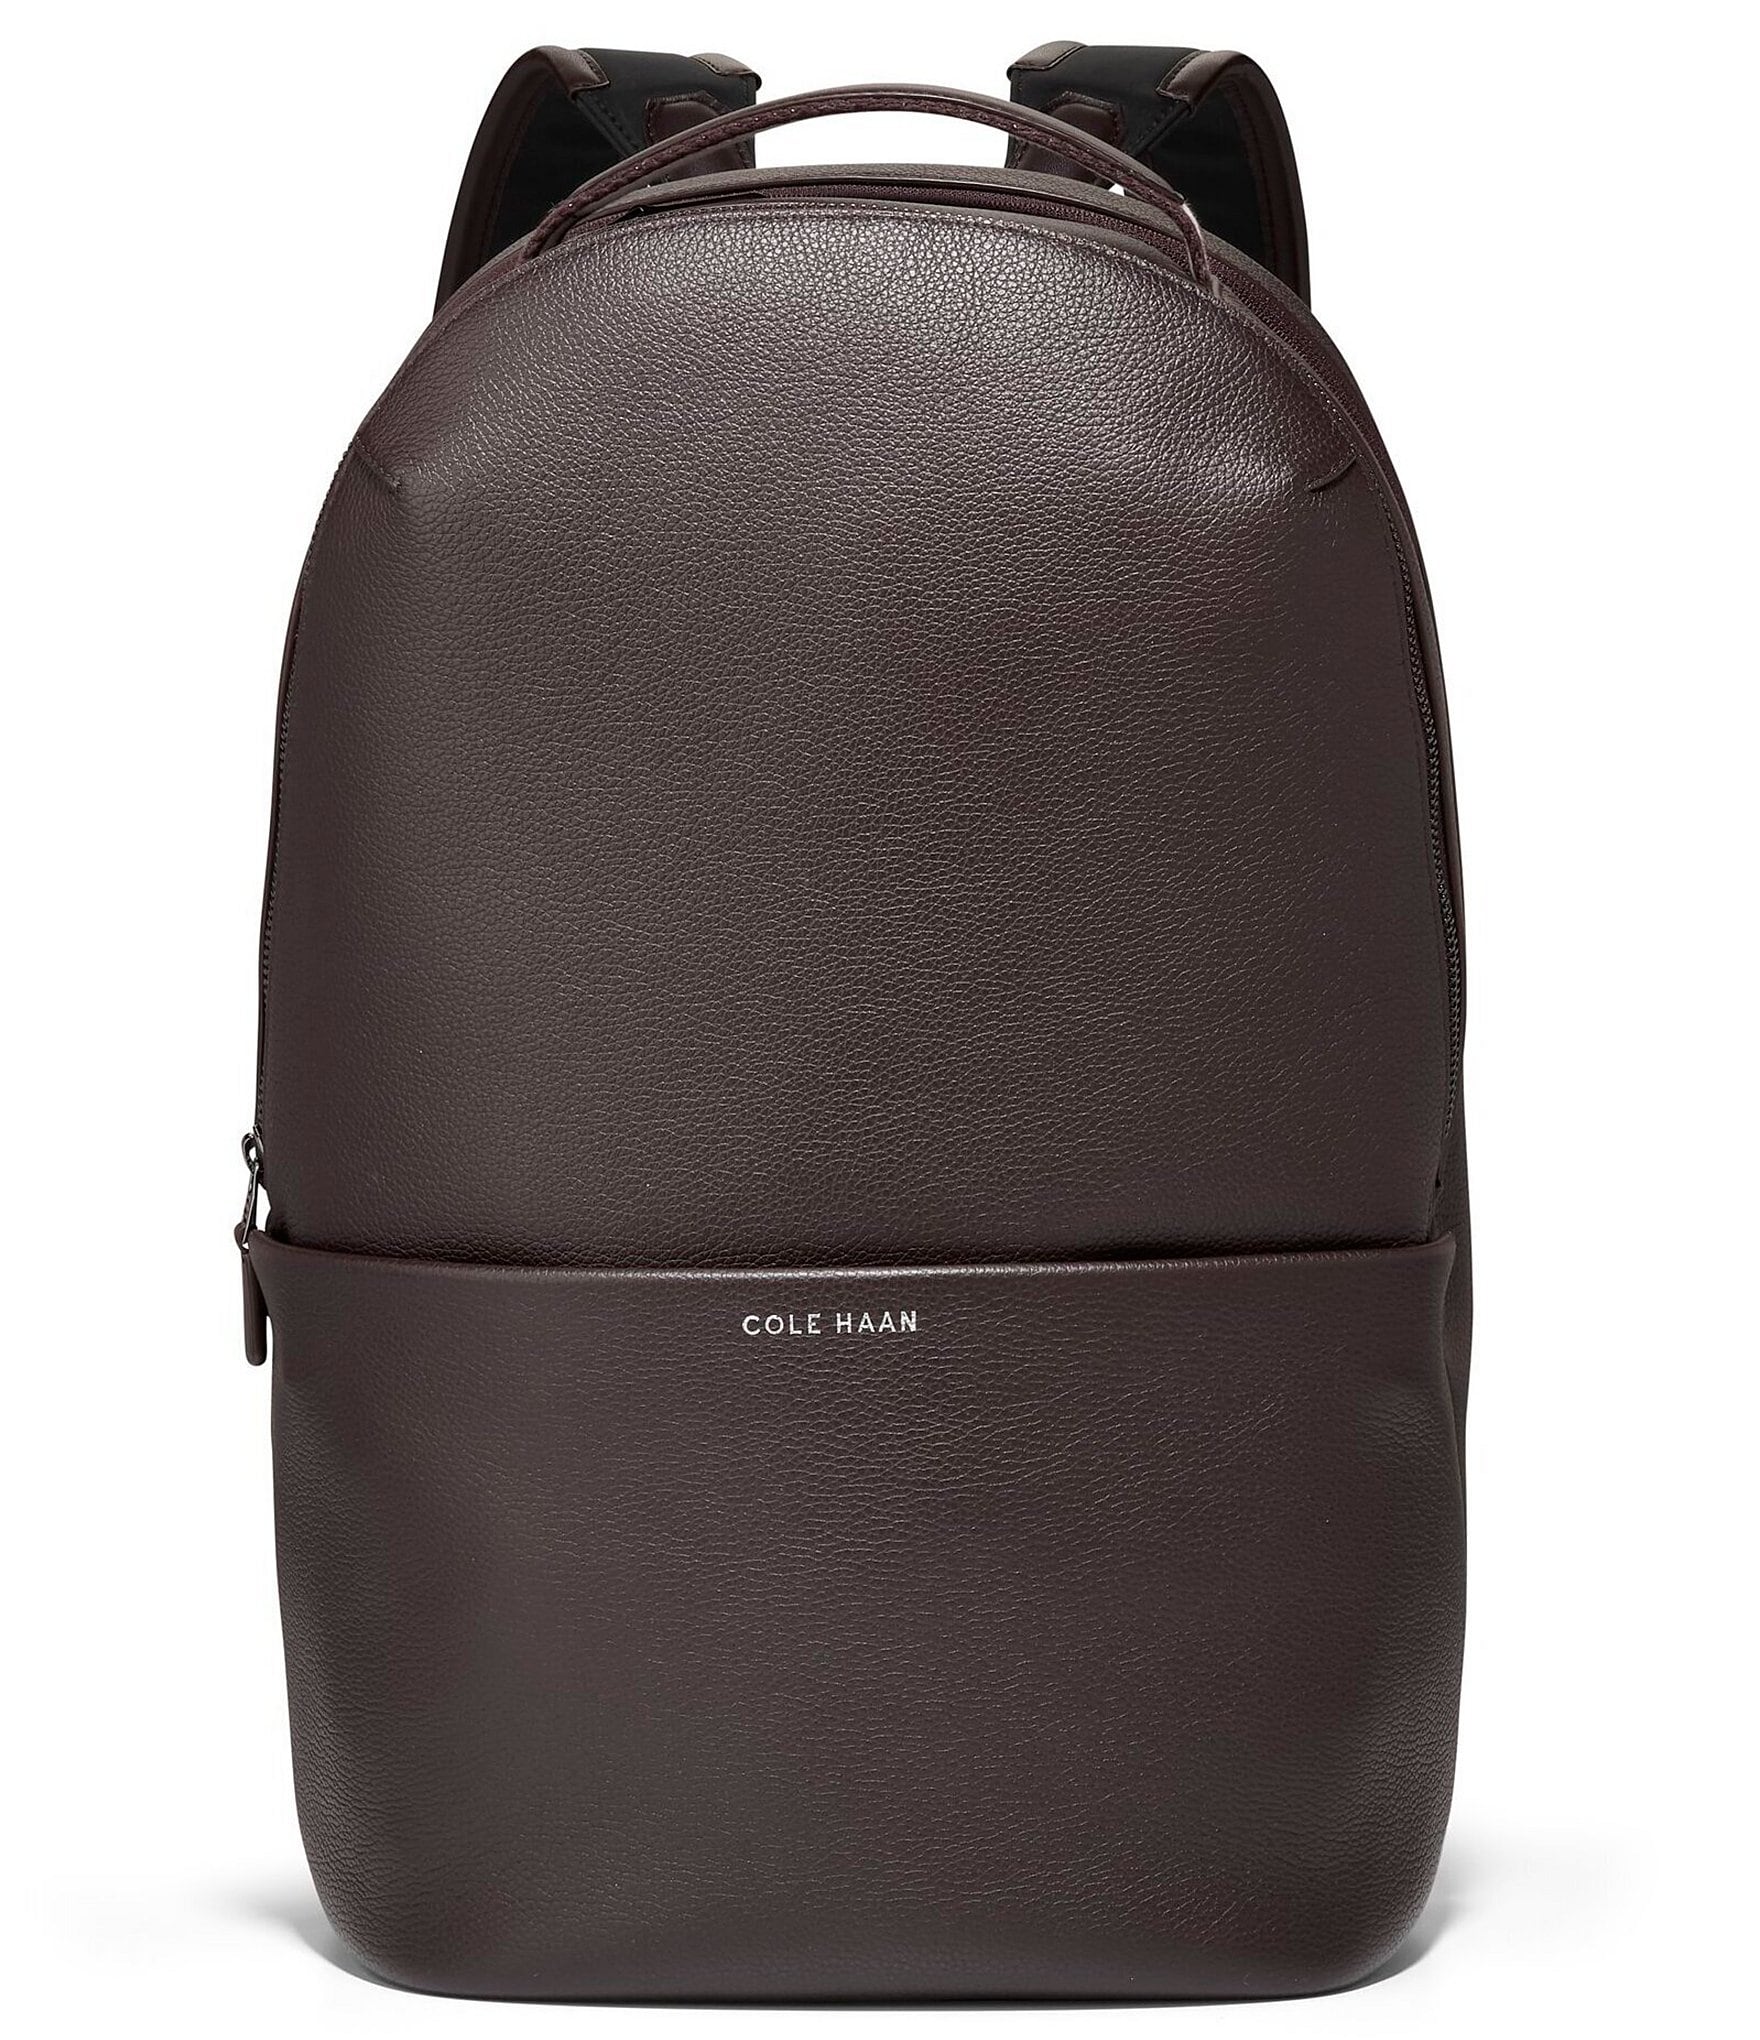 Shop Cole Haan Men's Pebble Leather Backp – Luggage Factory